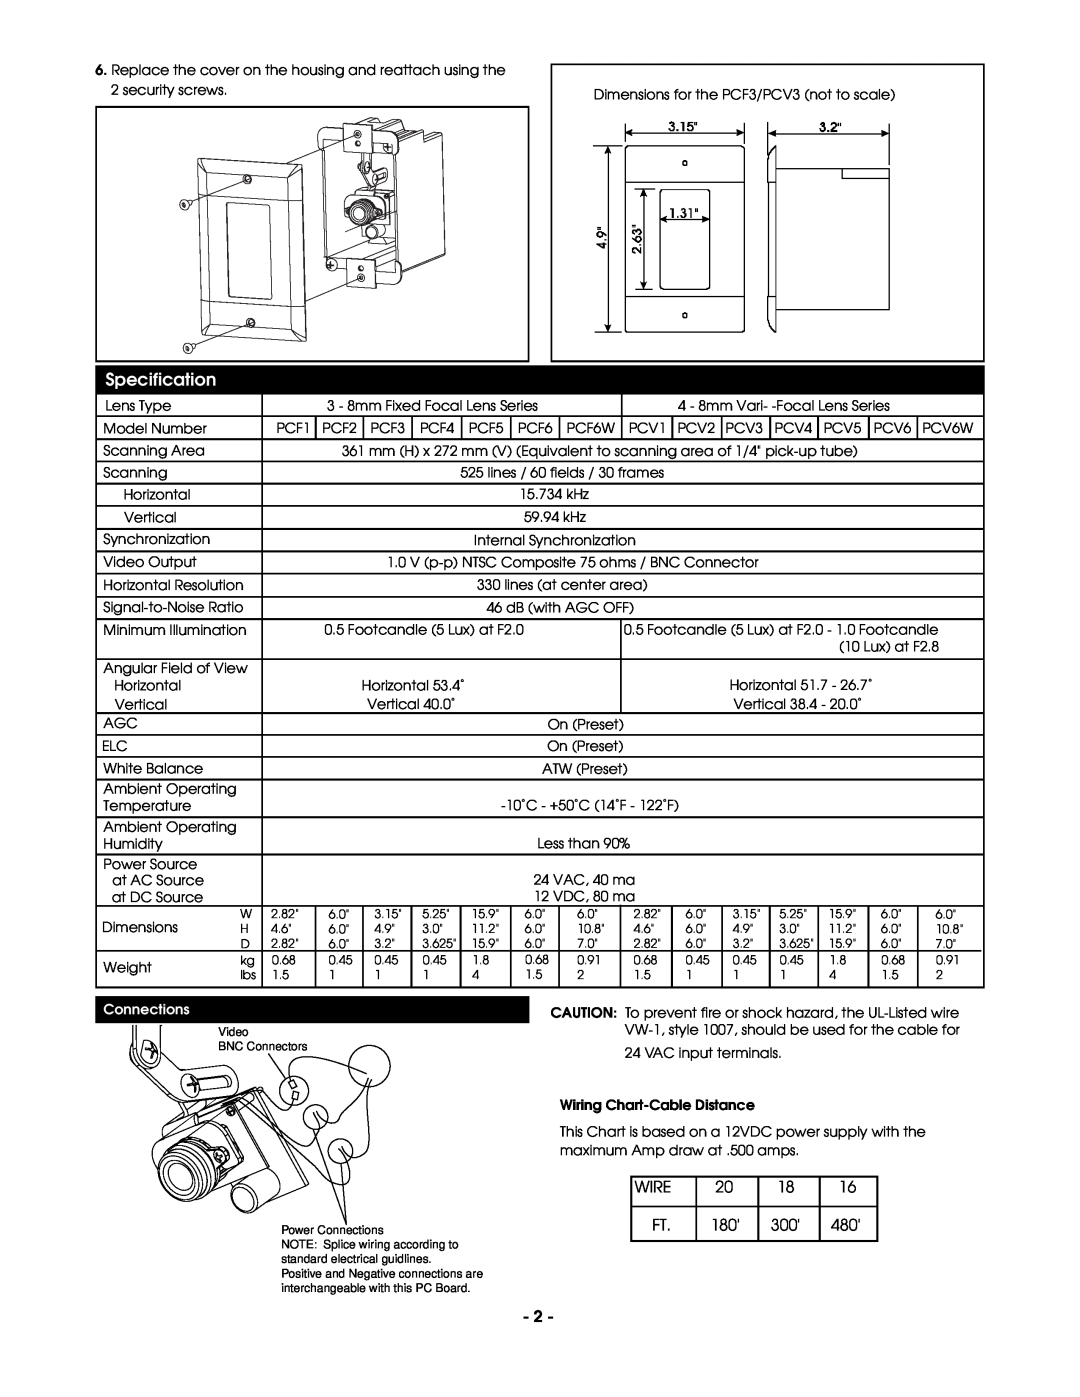 Panasonic PCF3, PCV3 manual Specification, Wire, Connections 